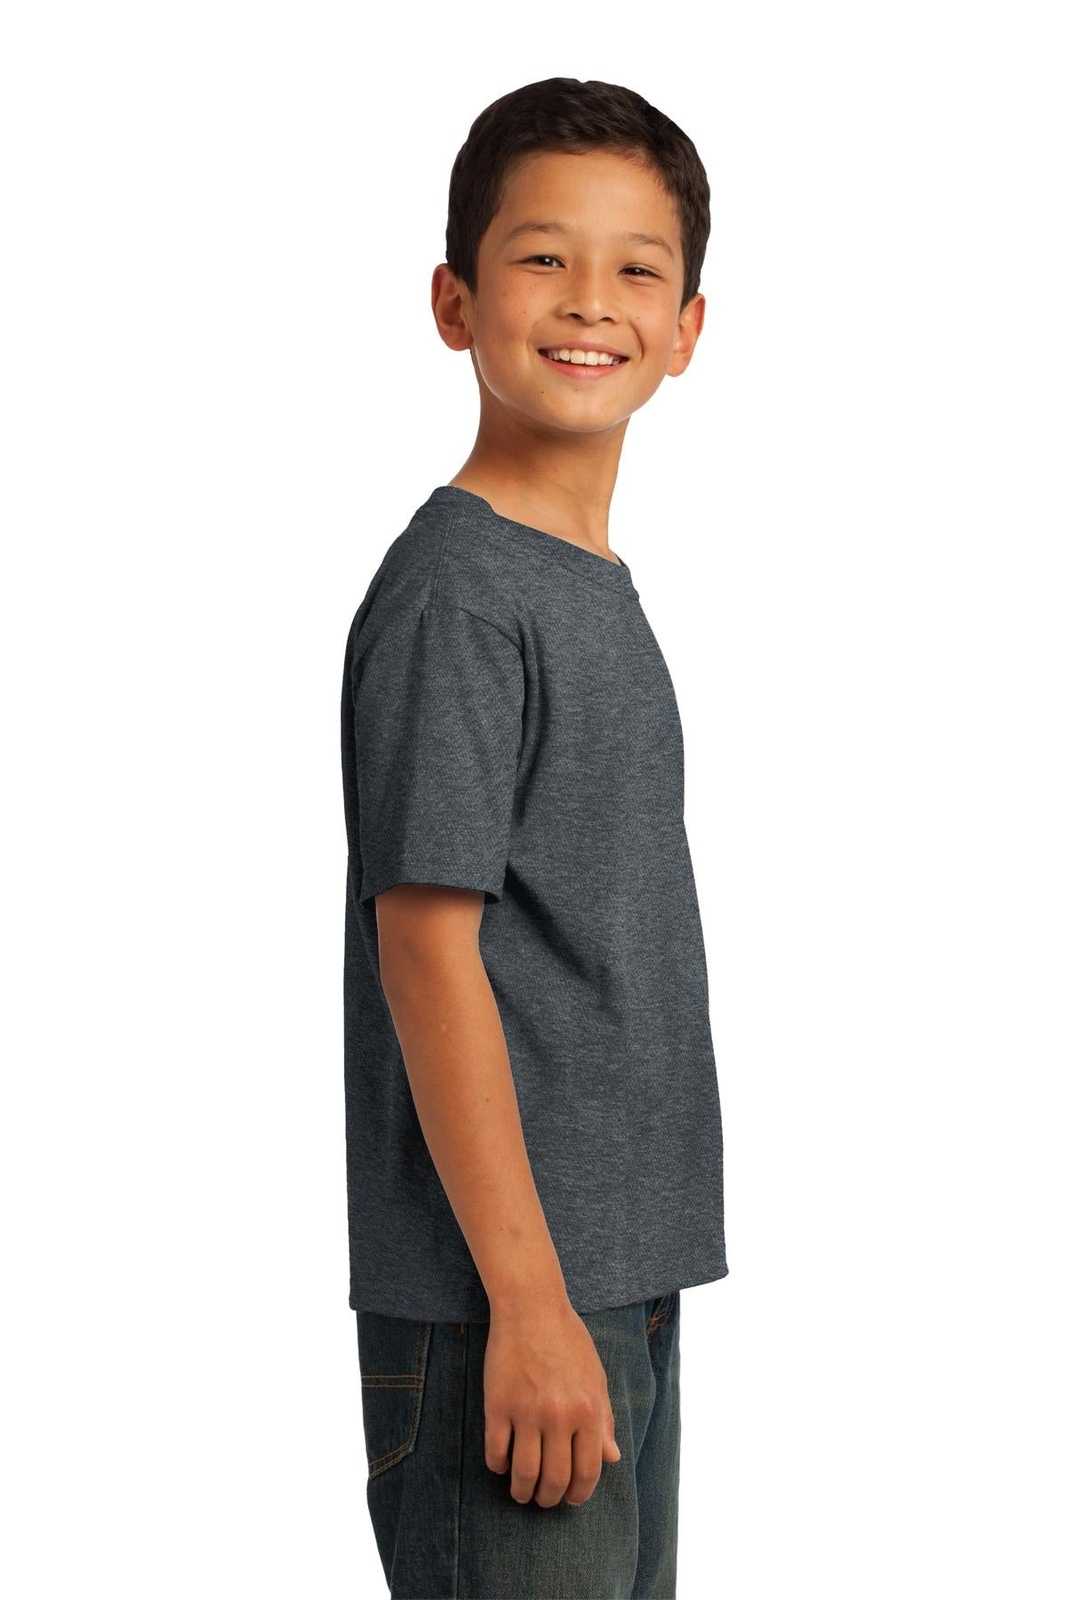 Fruit of the Loom 3930B Youth HD Cotton 100% Cotton T-Shirt - Black Heather - HIT a Double